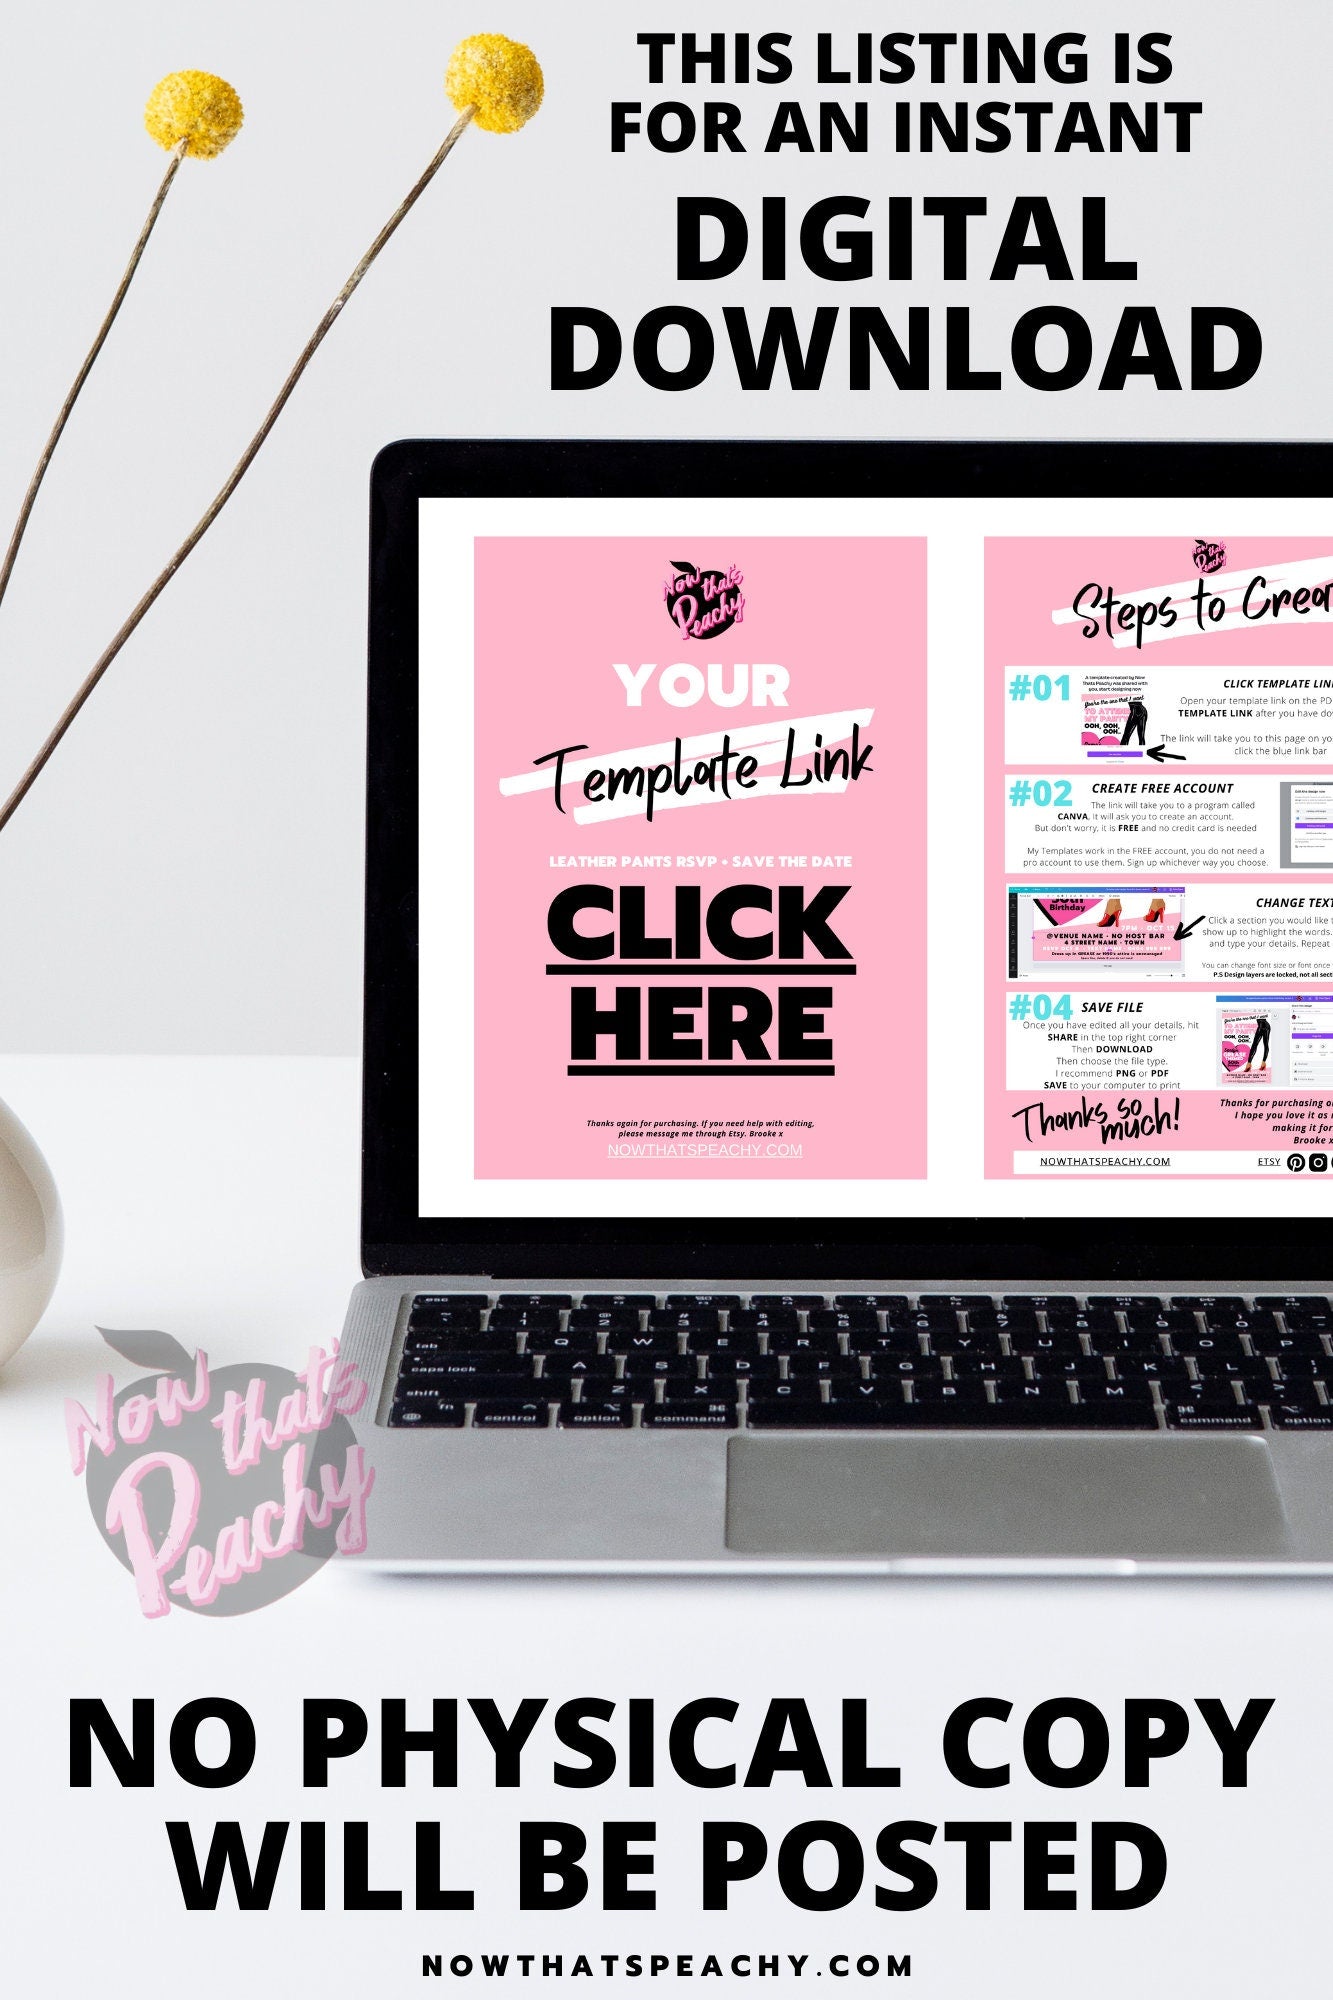 Grease Movie Editable party invite easy to edit in canva custom 1950s fifties 50's printable template digital instant download edit Danny Sandy T-birds Pink Ladies  invite soda hop jukebox rockabilly rock'n'roll musical movie design pink black white modern color fun themed birthday event 